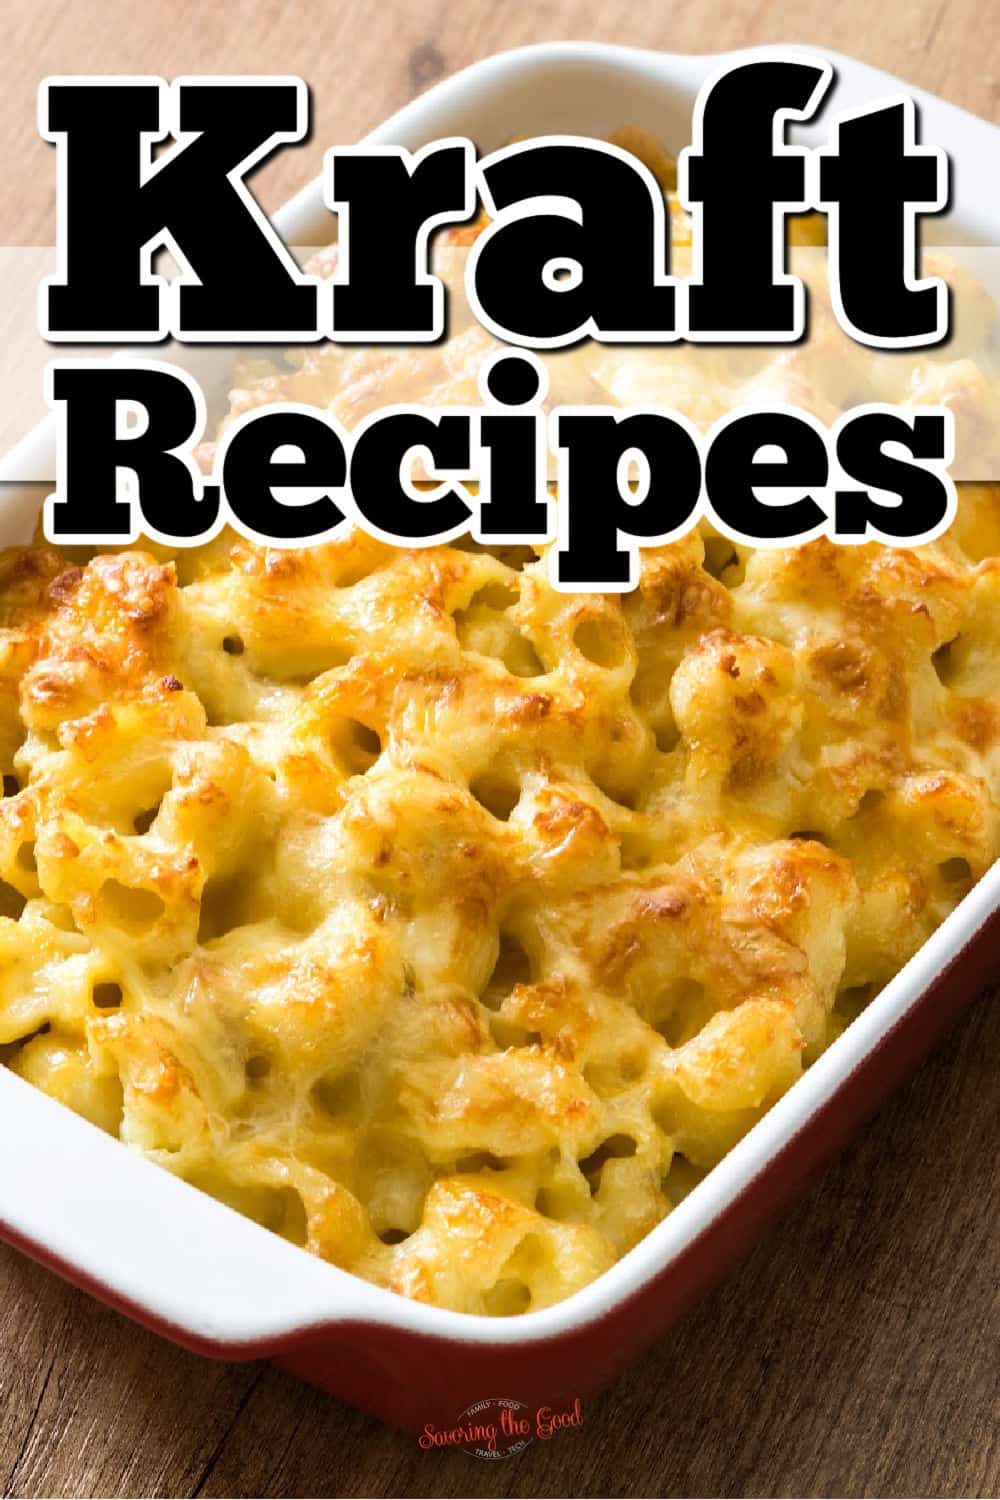 baked mac and cheese in a red baking dish 'kraft recipes' in text over for Pinterst.